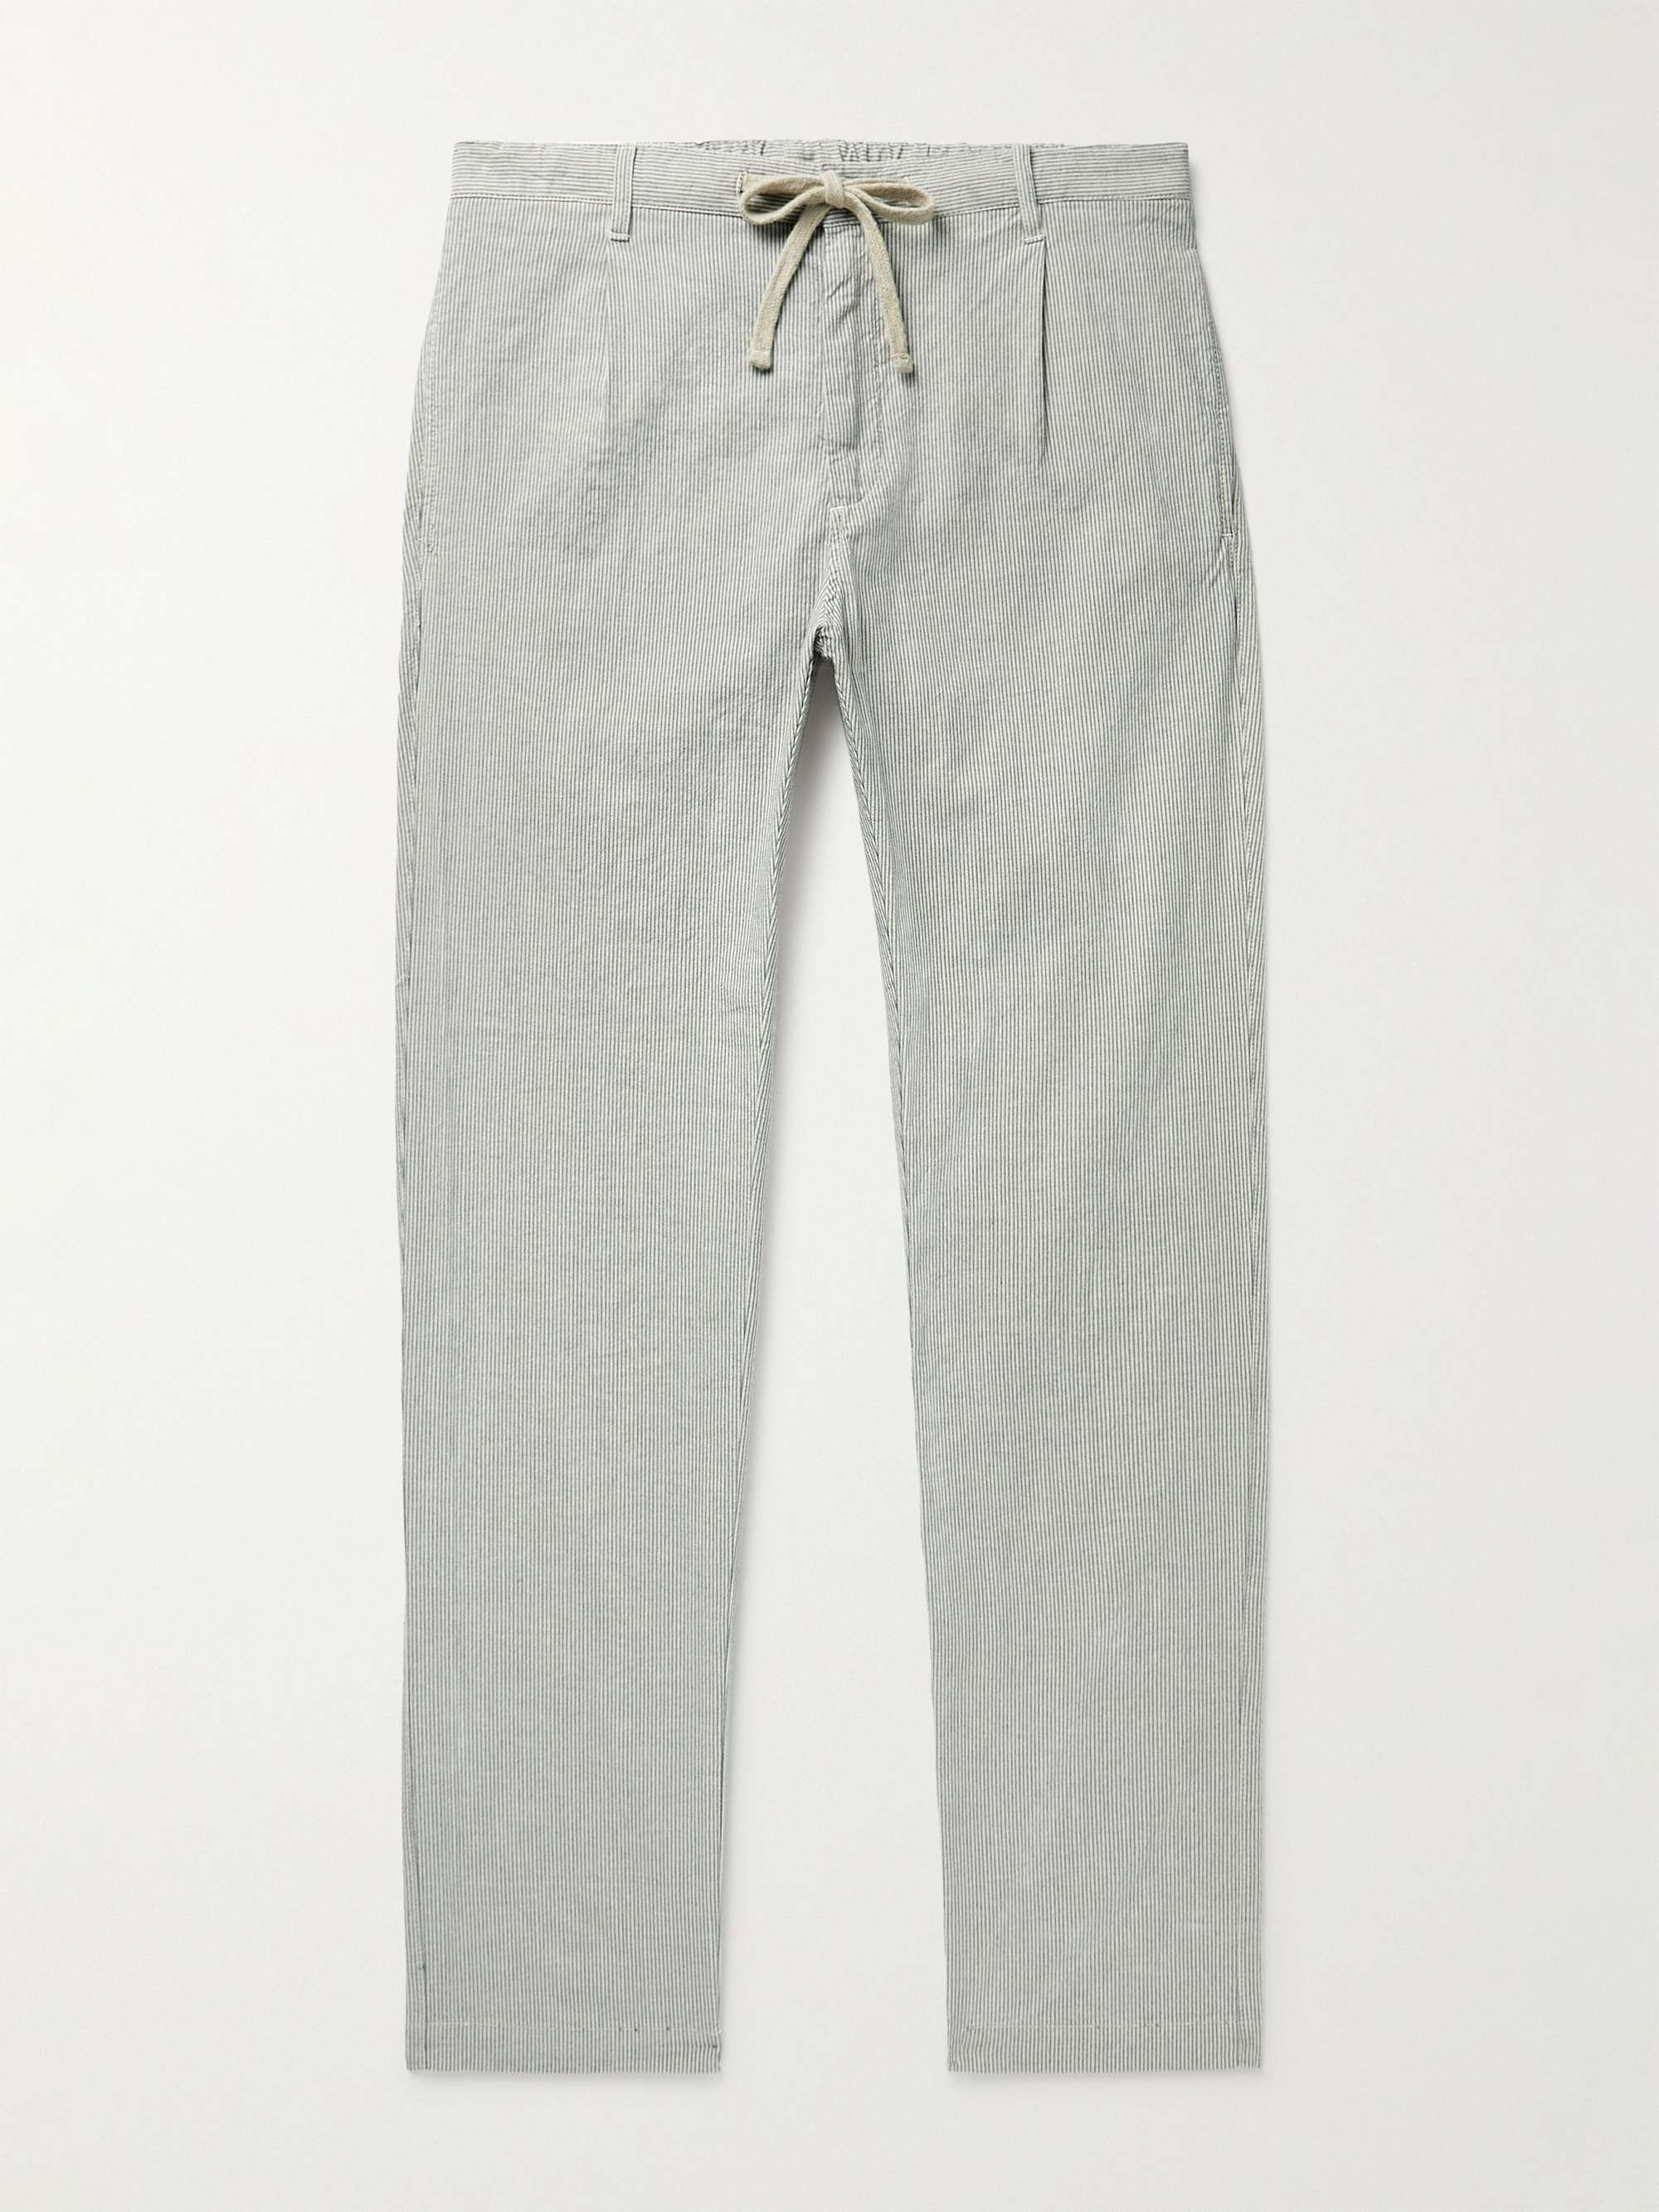 Buy Light Grey Linen Blend Drawstring Trousers from Next India